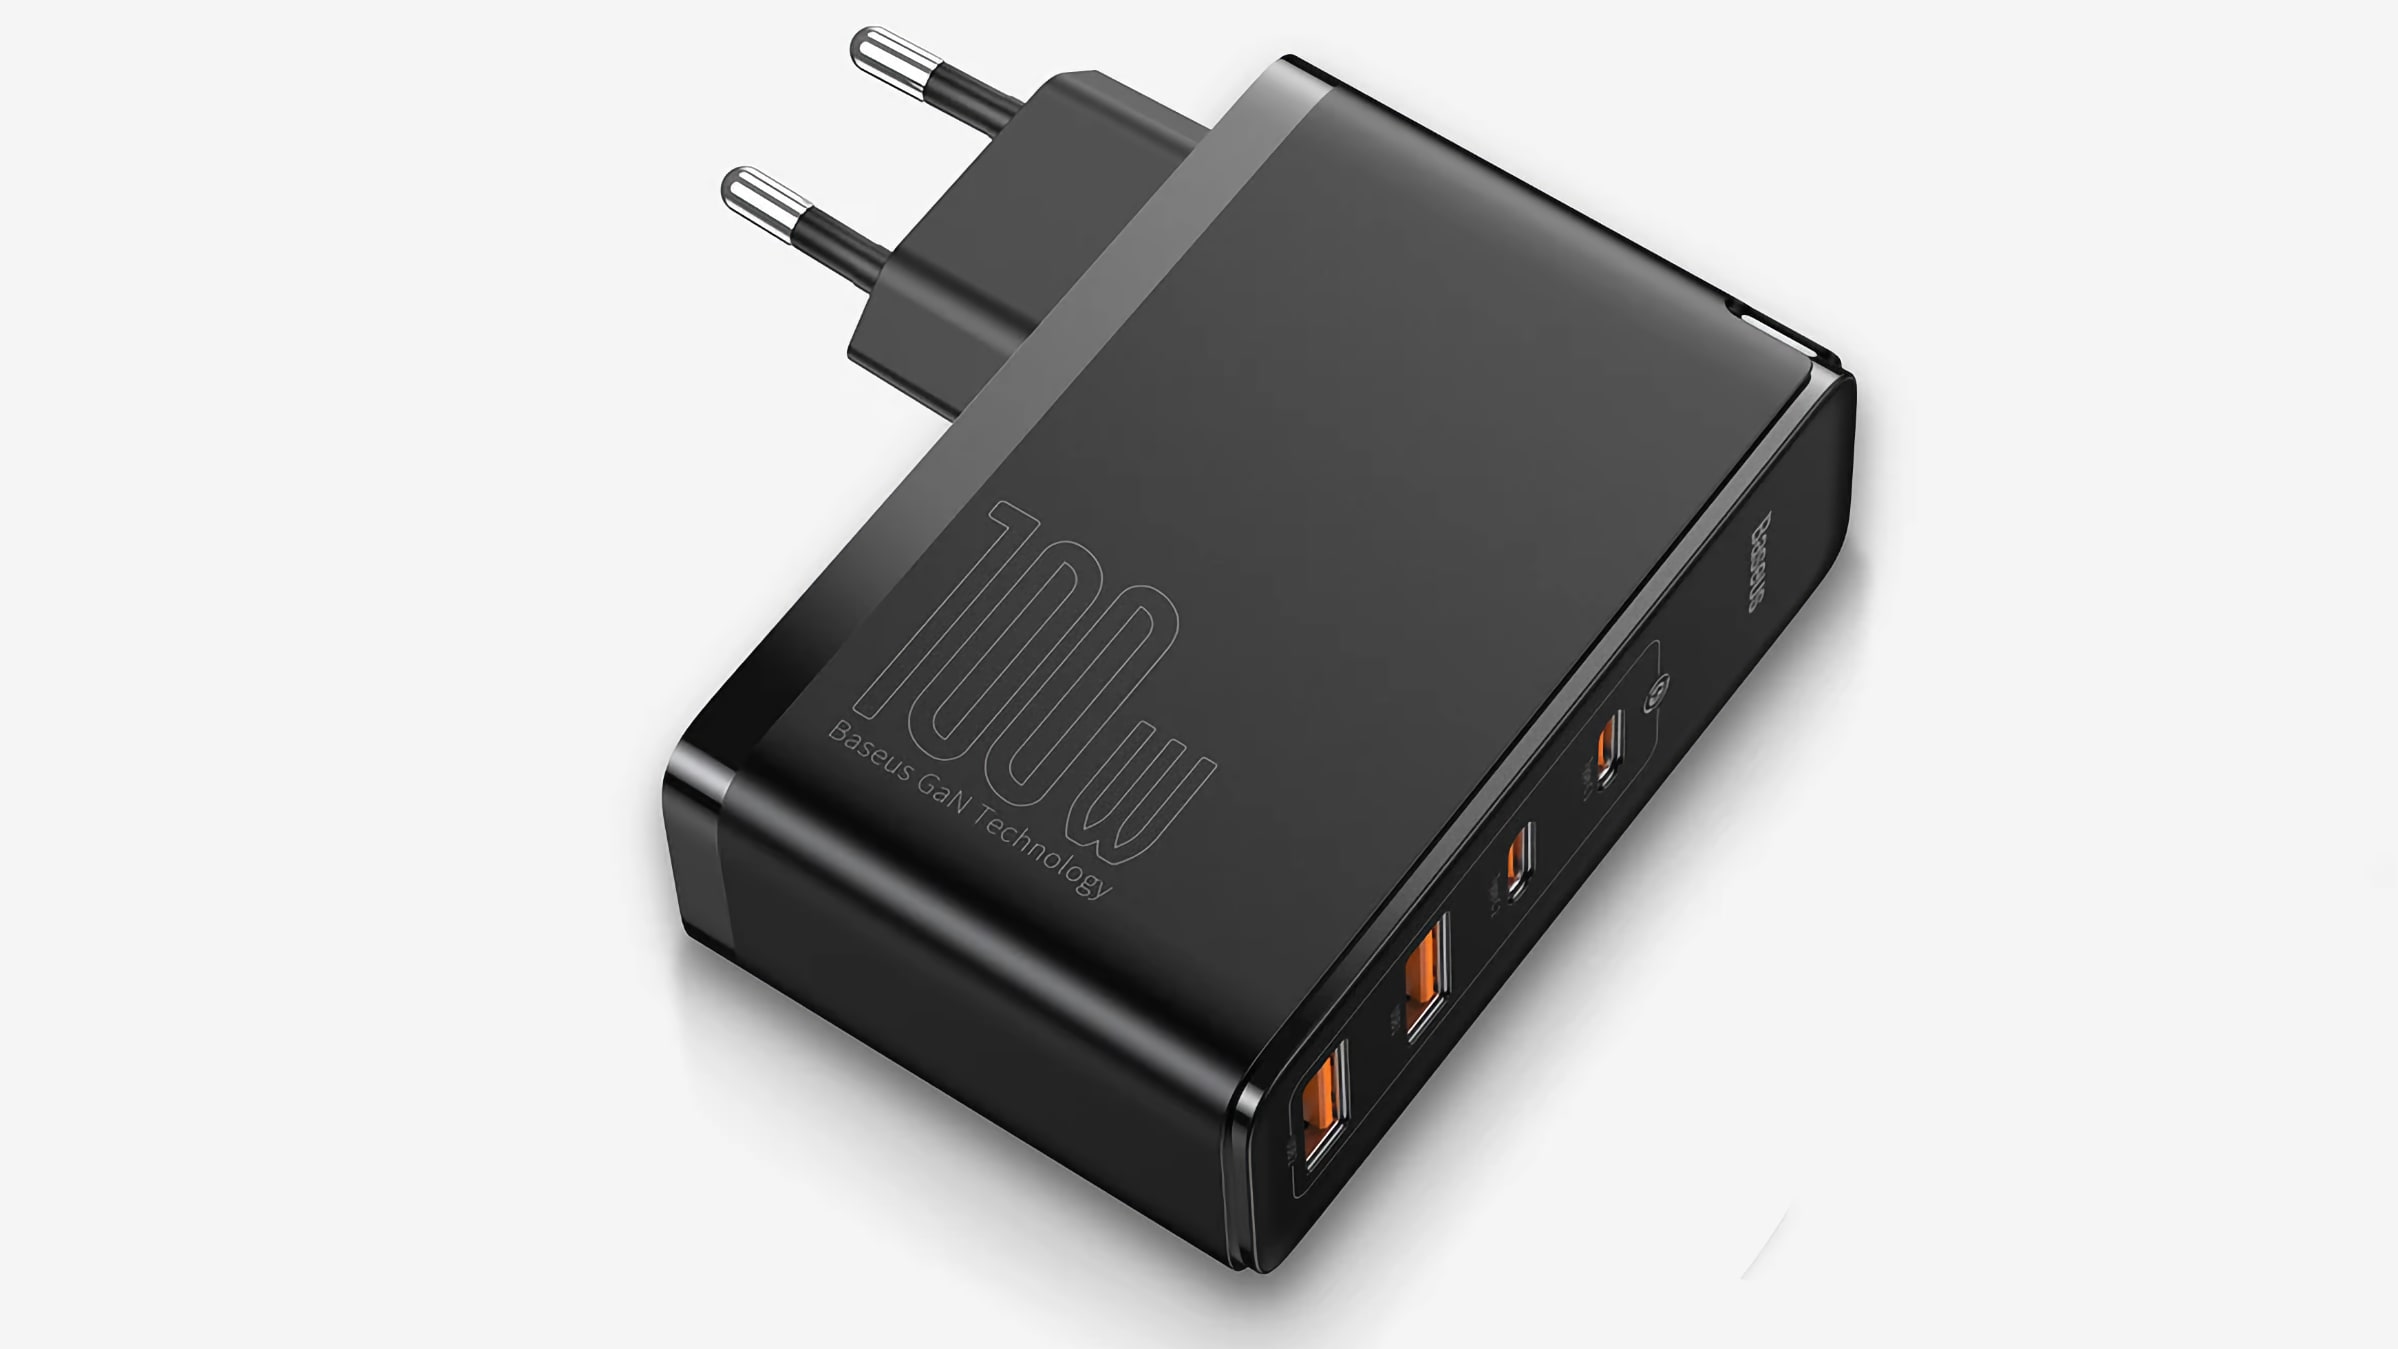 This 100W Baseus wall charger with 4 fast-charging ports is great for travel